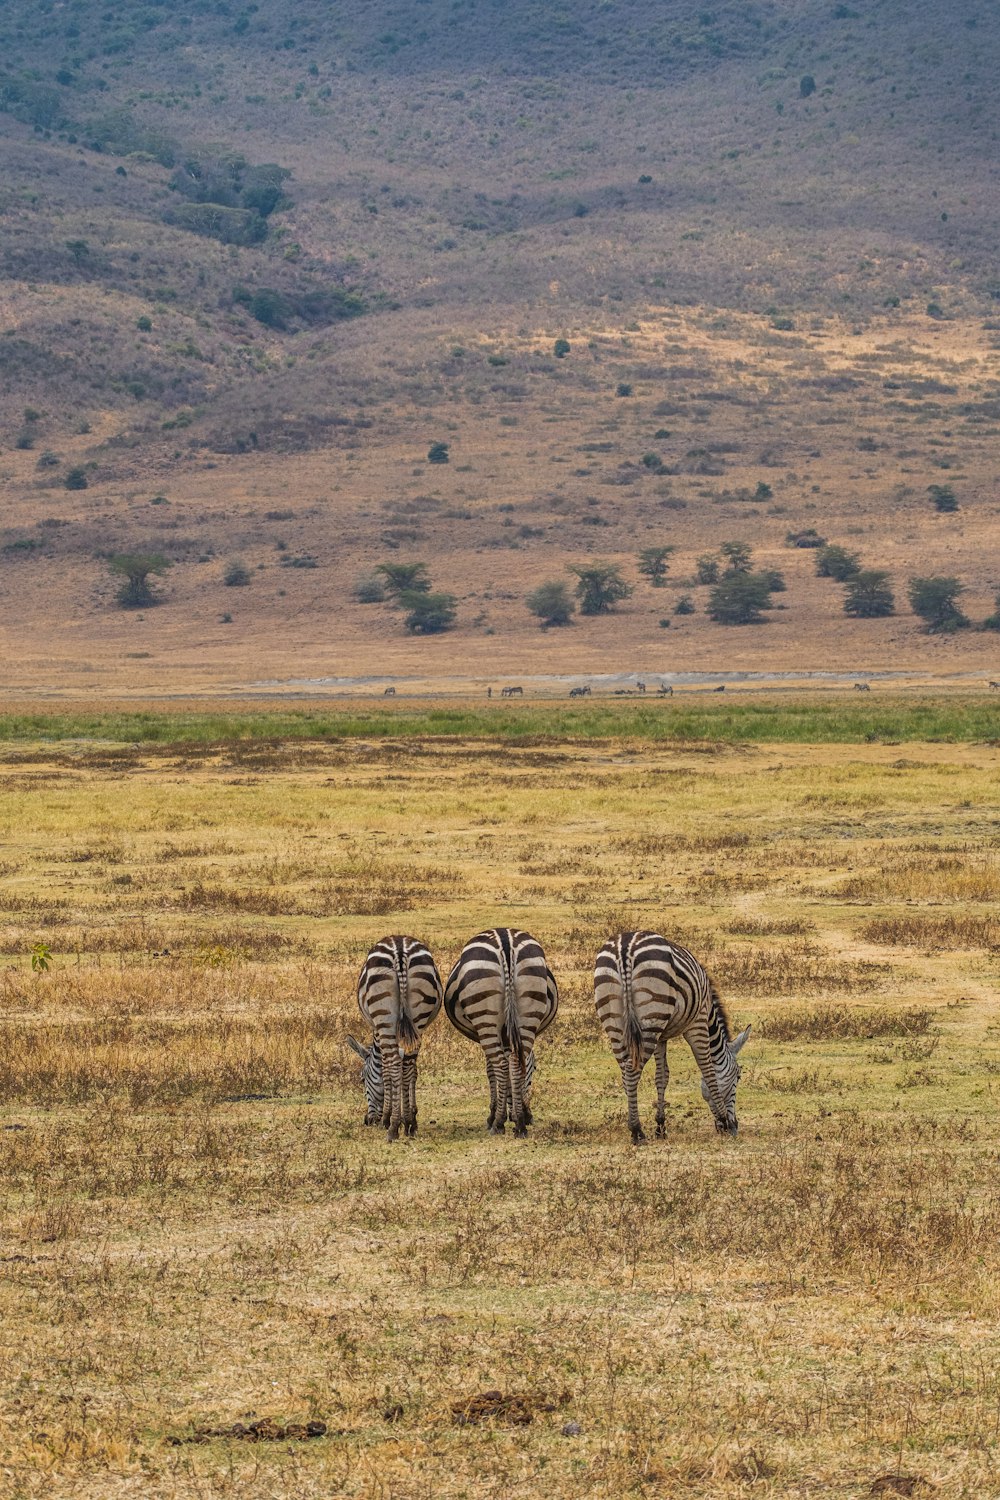 three zebras grazing in a field with mountains in the background